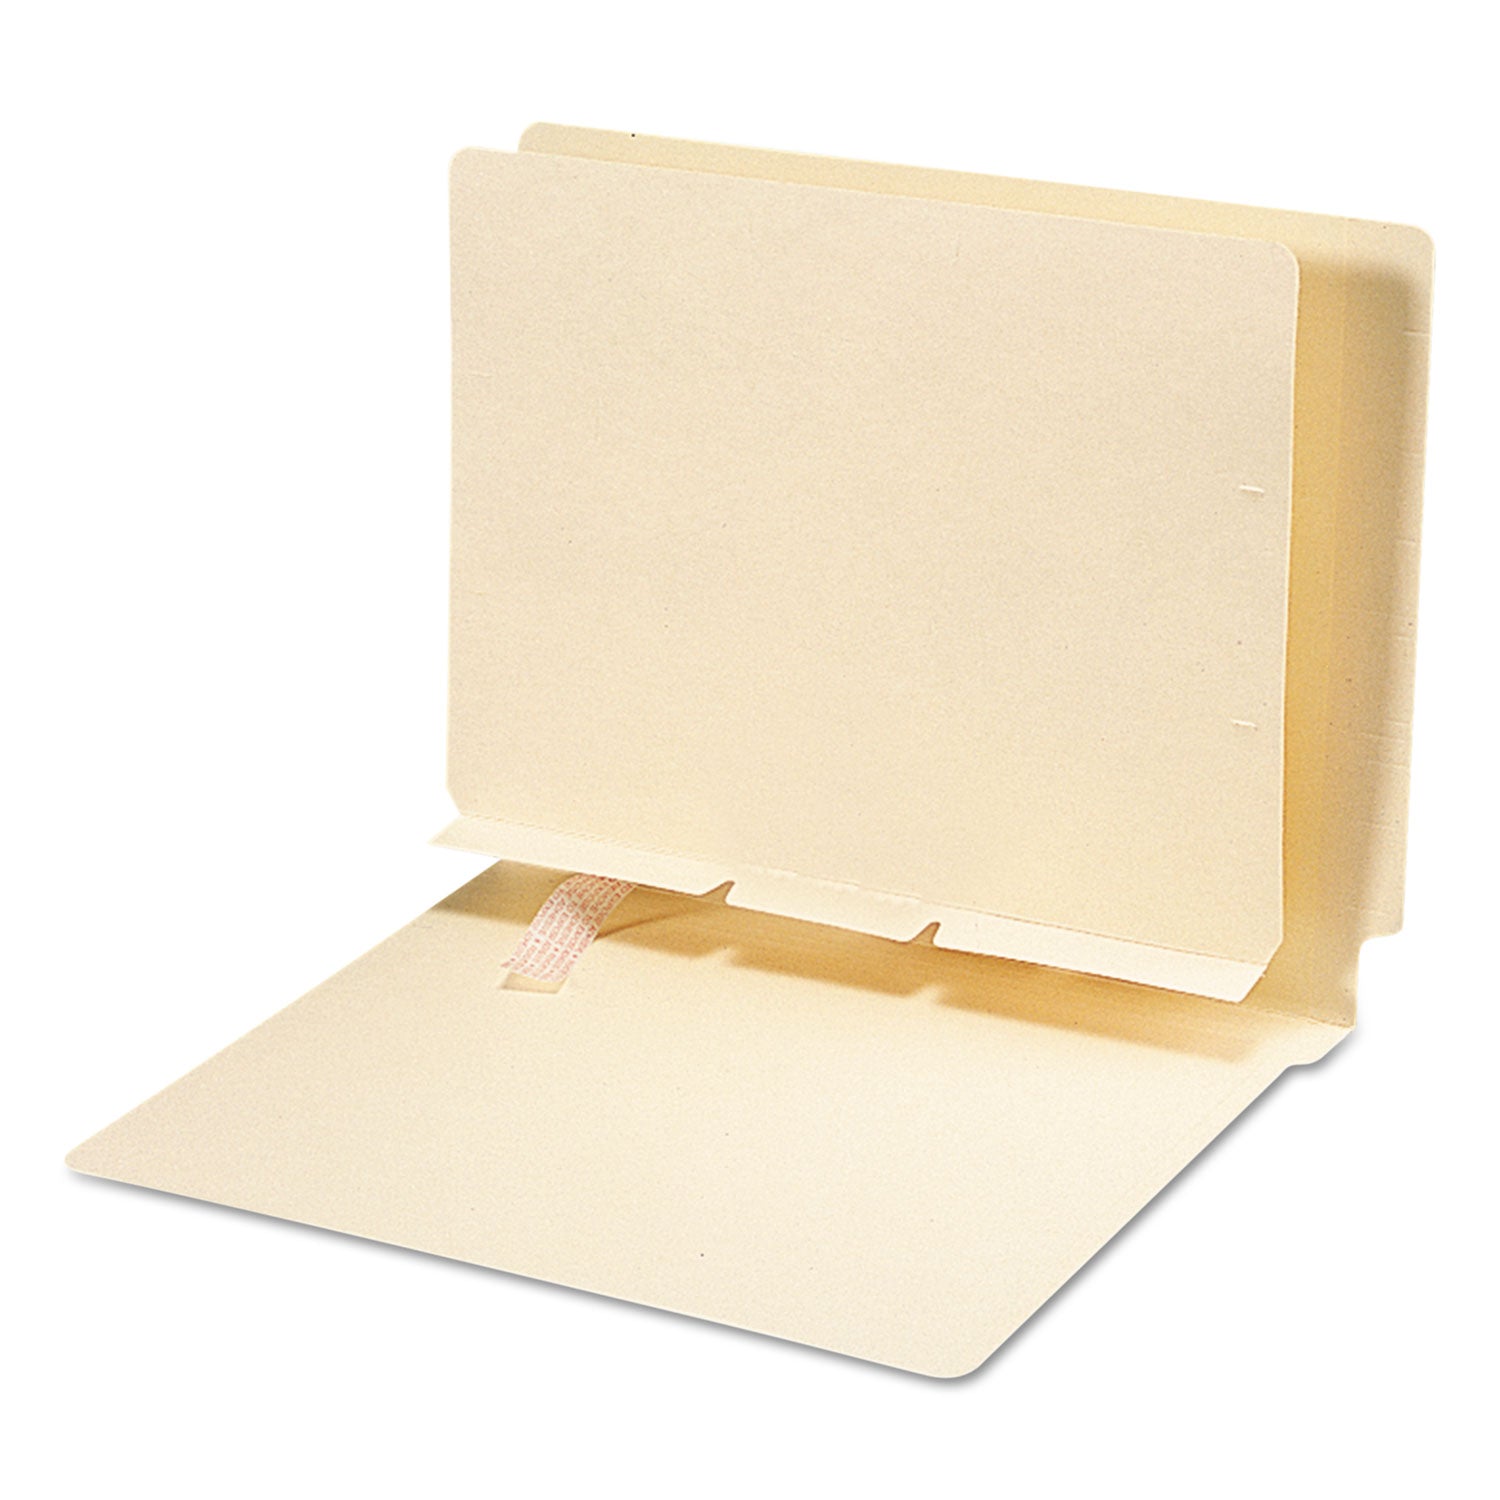 Self-Adhesive Folder Dividers for Top/End Tab Folders, Prepunched for Fasteners, 1 Fastener, Letter Size, Manila, 100/Box - 